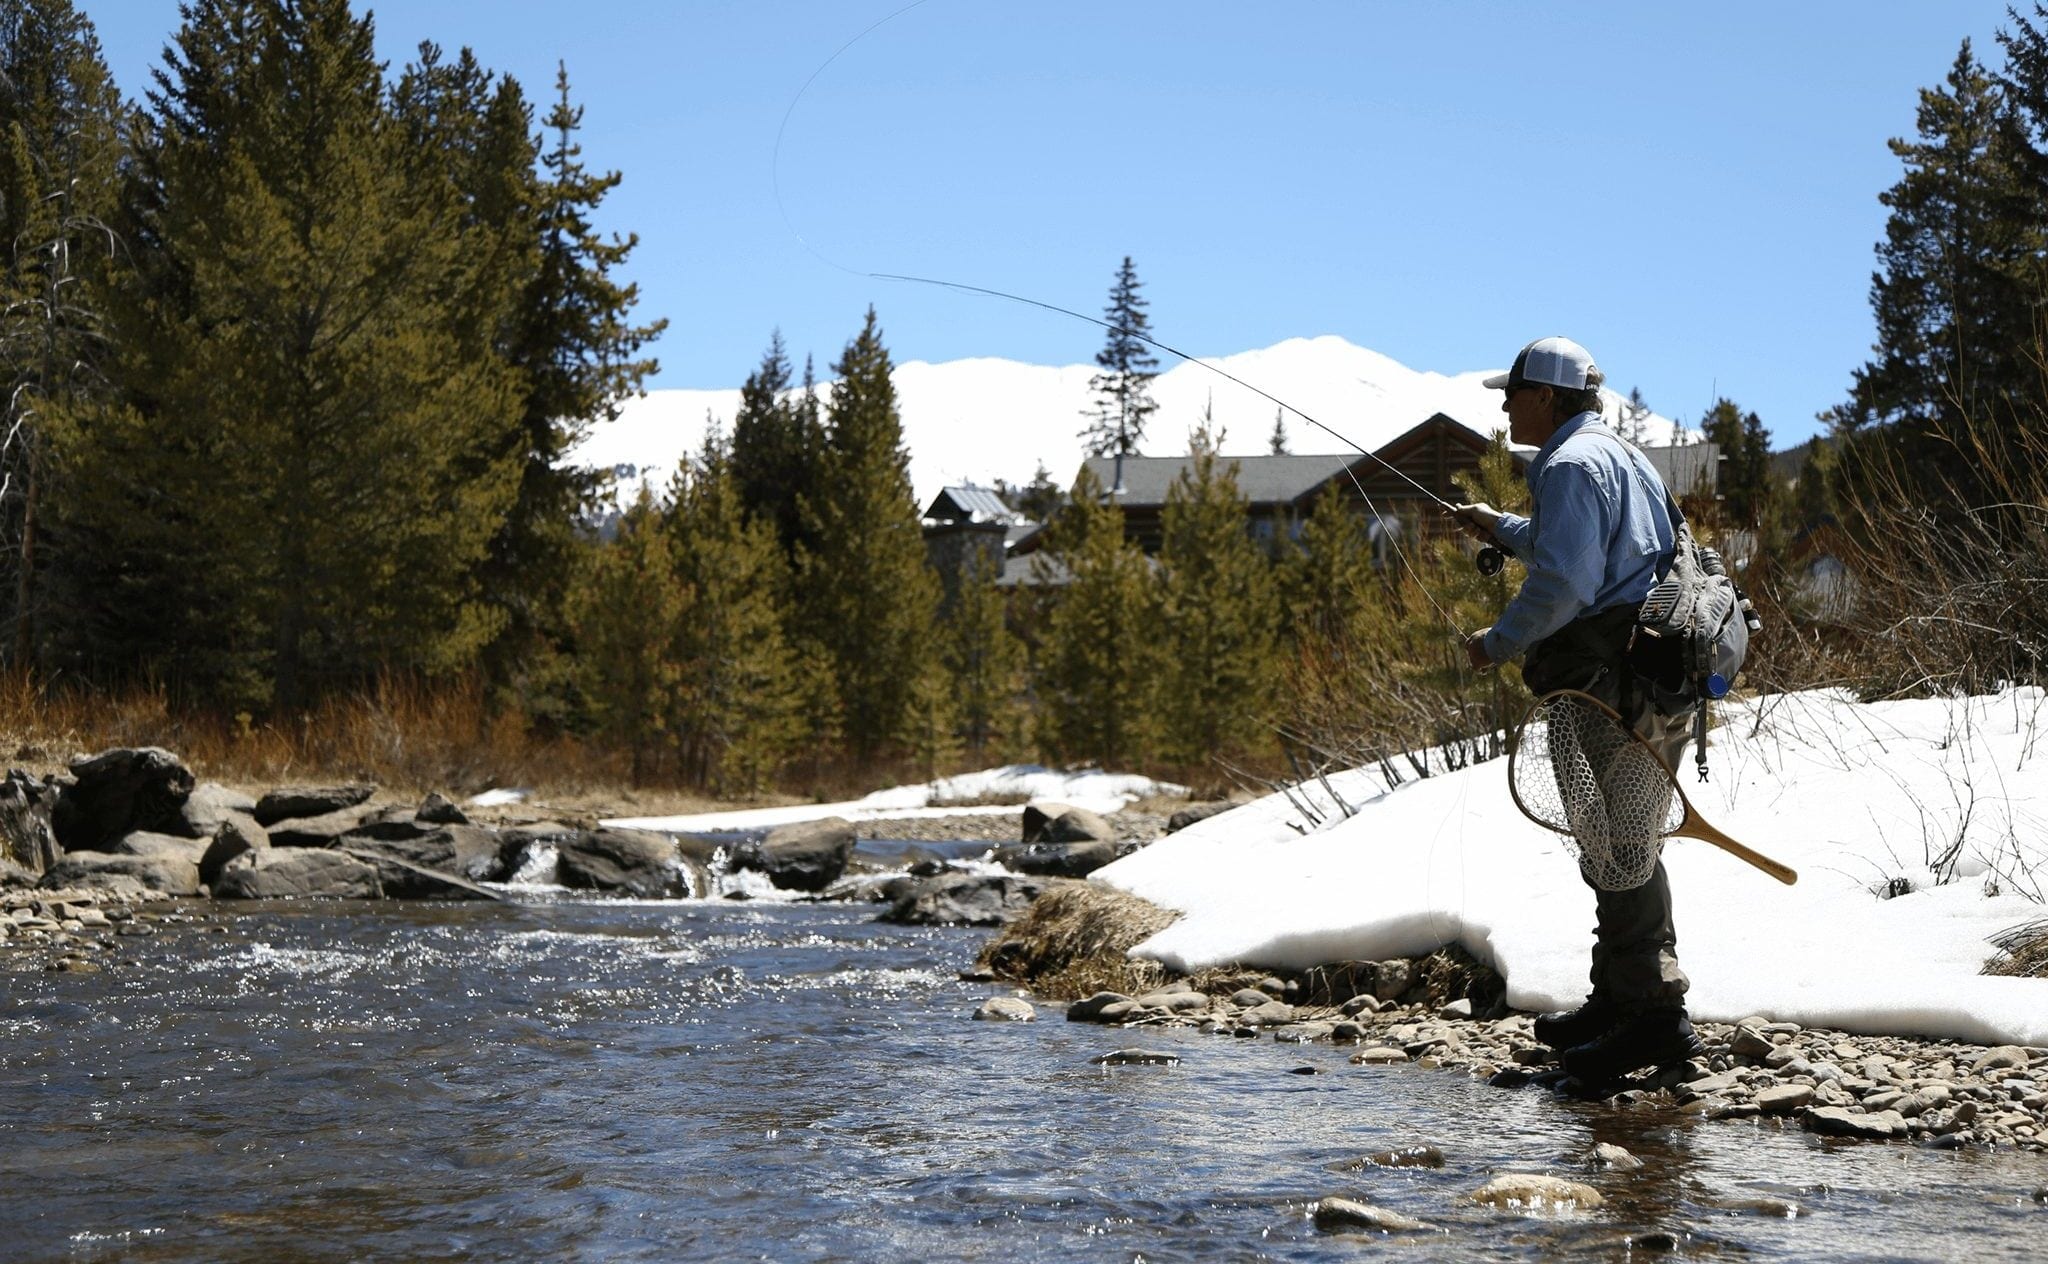 A man casting while fly fishing with snow on the ground in Breckenridge.